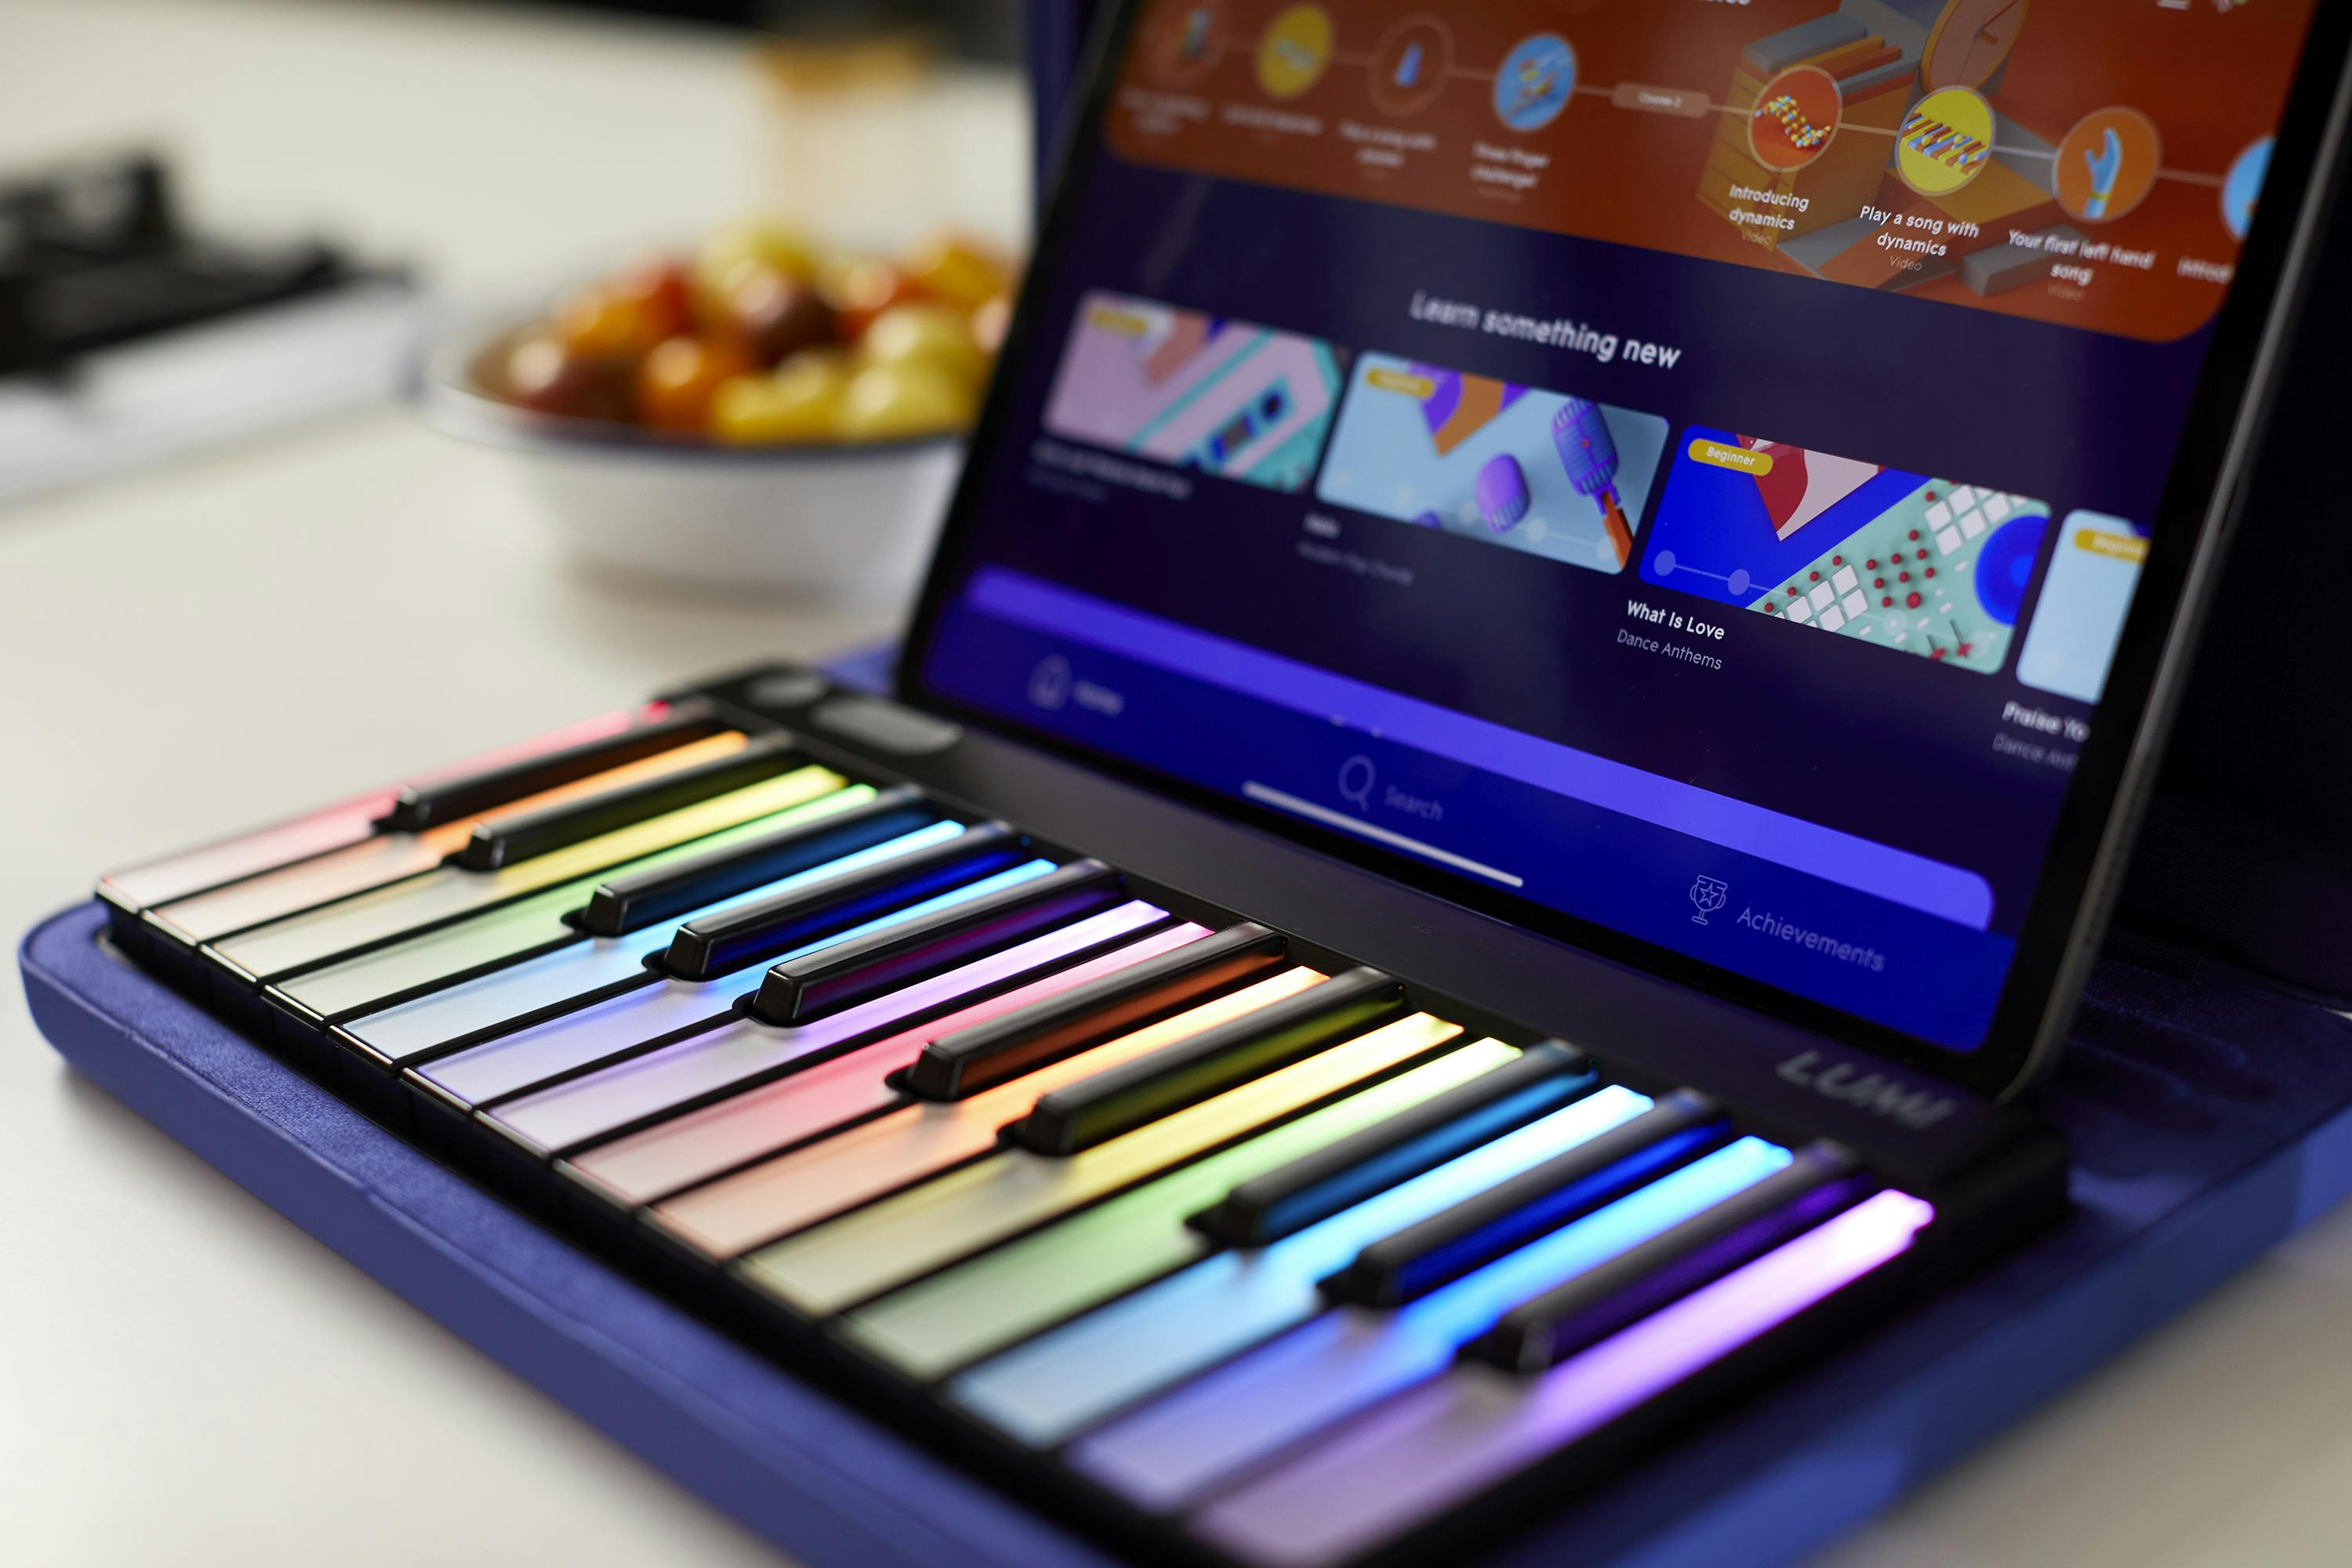 Learn piano through visual learning by using lights, colors and interactive games with LUMI Keys & App